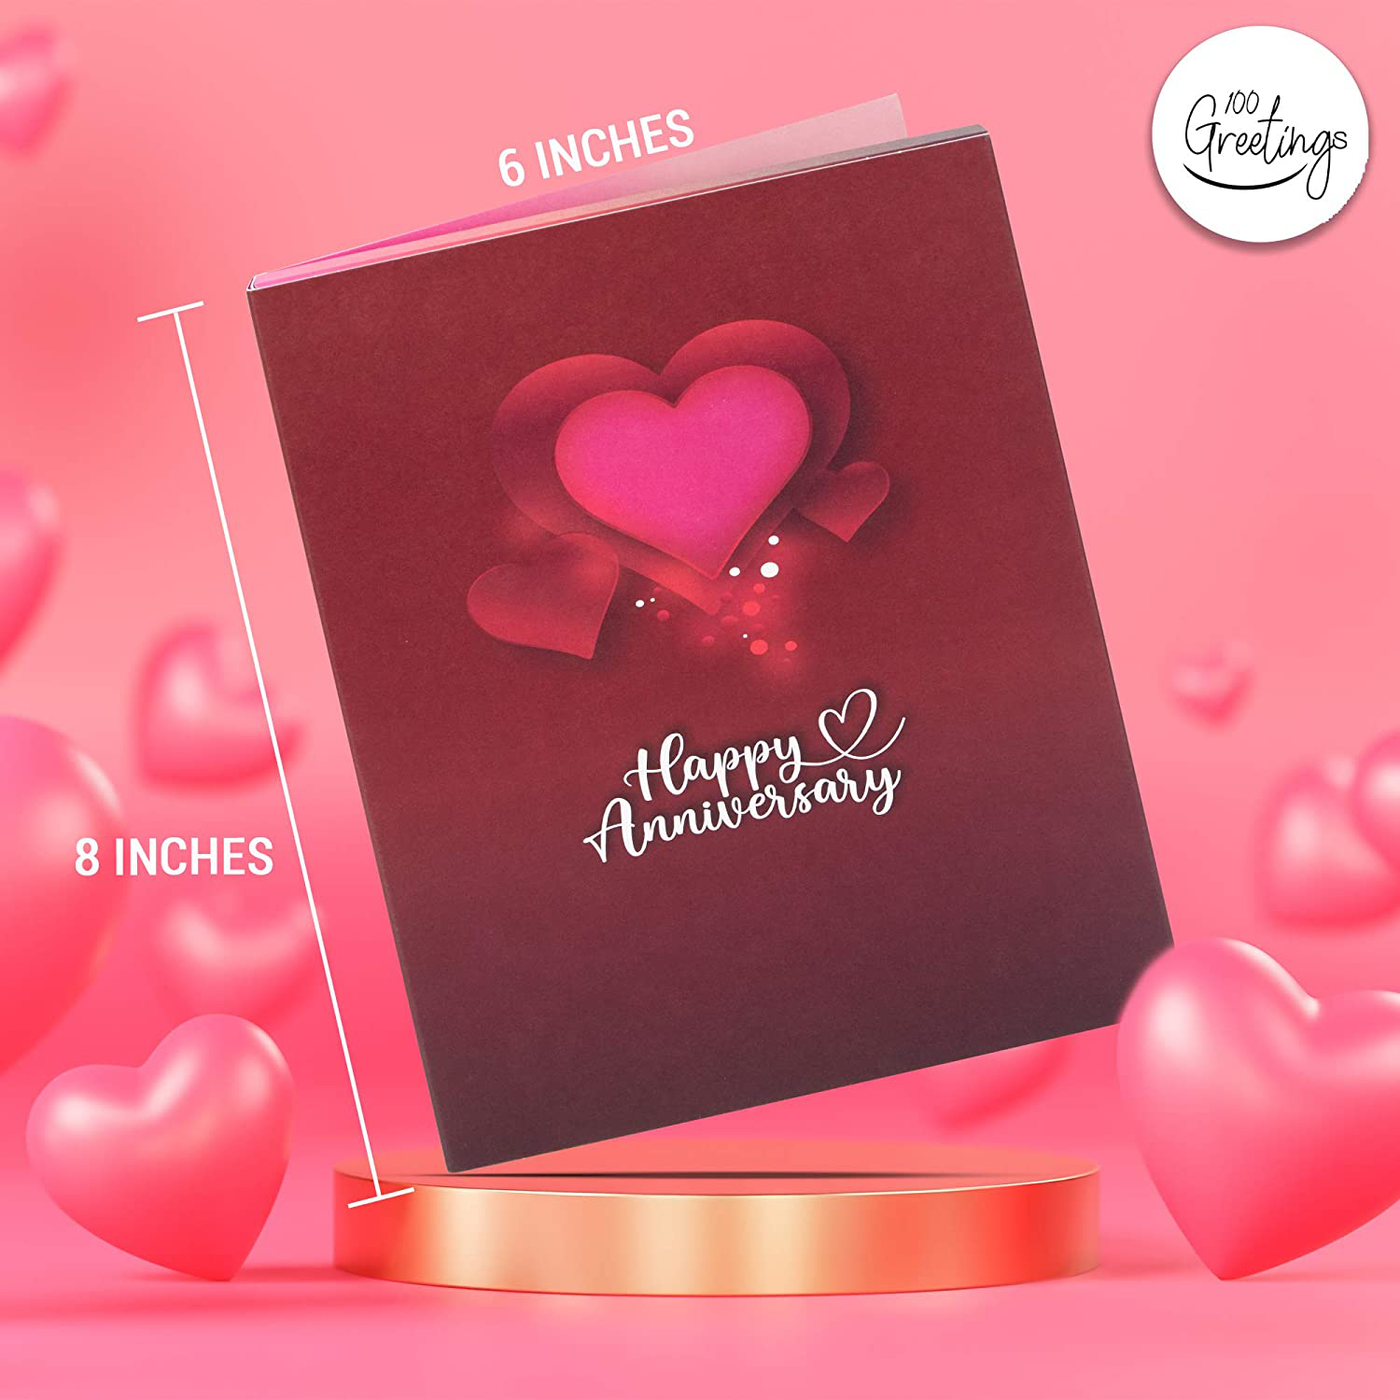 100 Greetings LIGHT & MUSIC Pop Up Happy Anniversary Card - Plays Song 'Just The Two of Us' - Happy Anniversary Cards for Husband - Wedding Anniversary Present for Wife - Gift for Her & Him